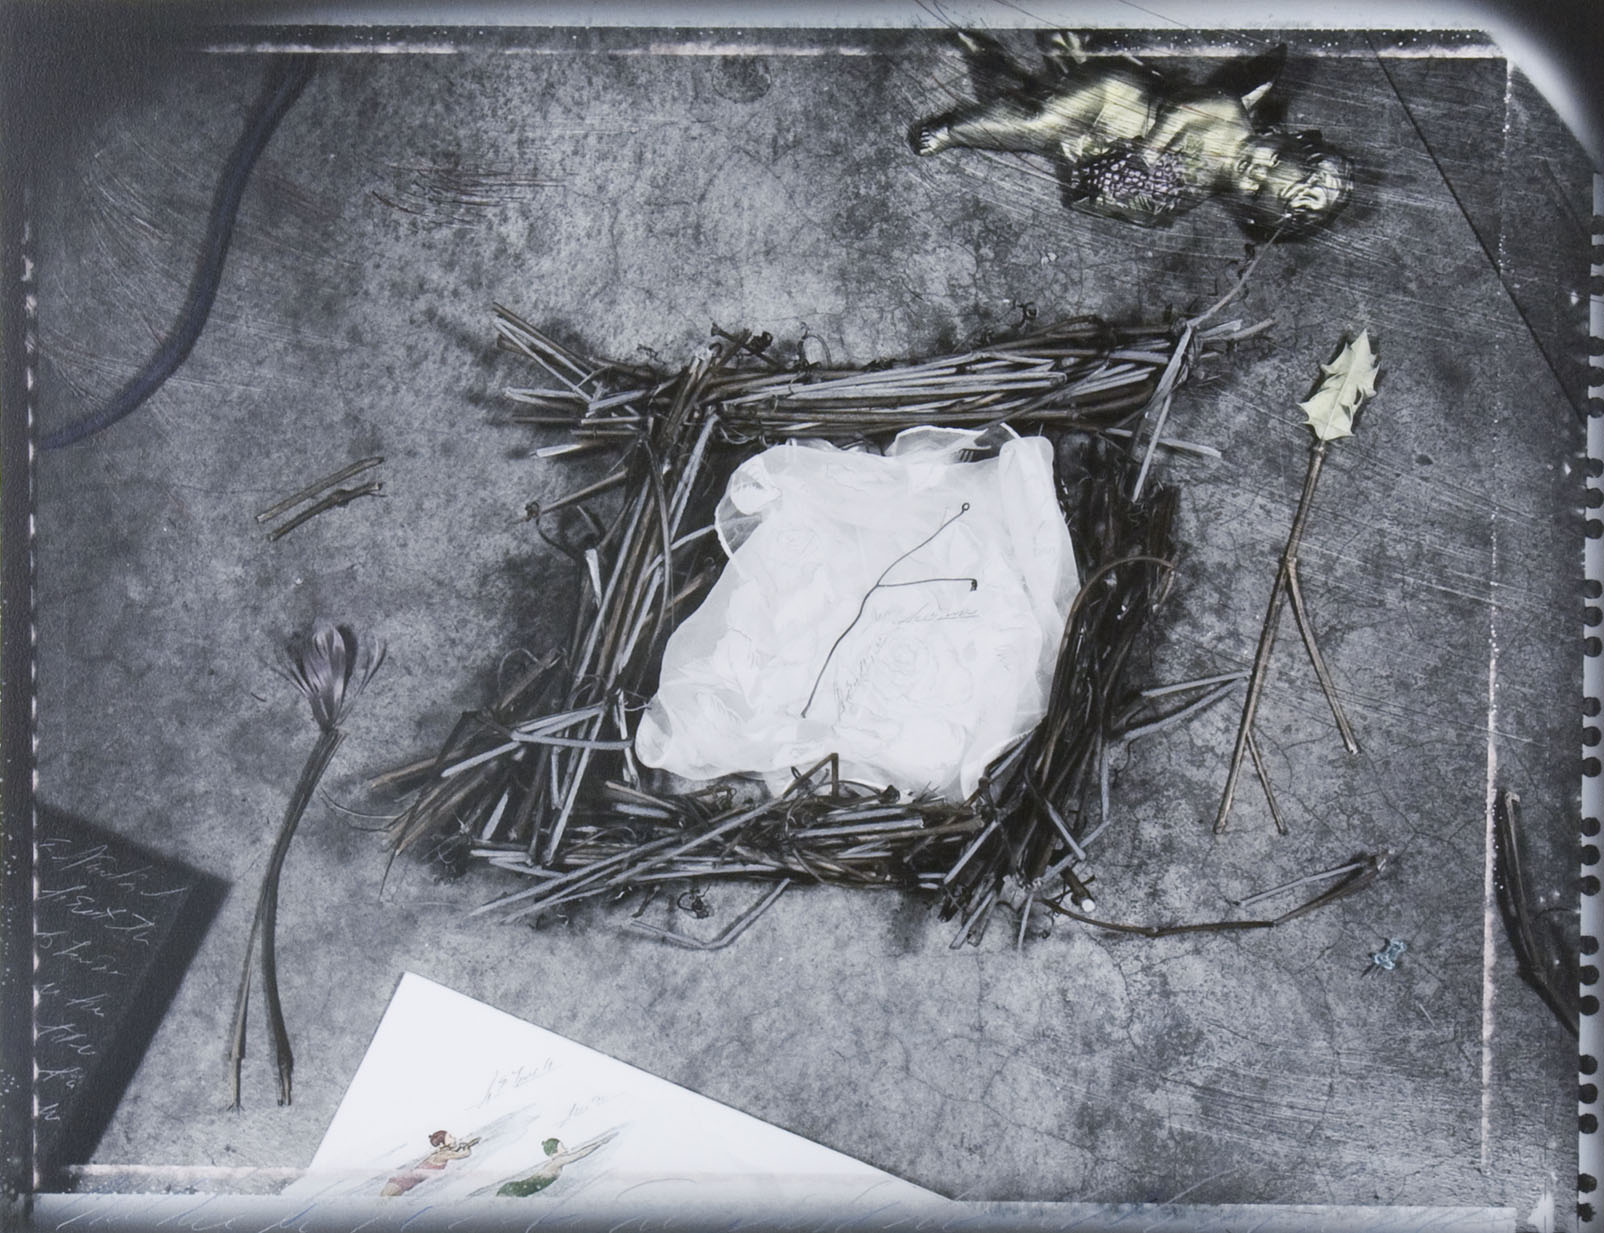 "Chart of Brief Forms #1/Nest", 1989